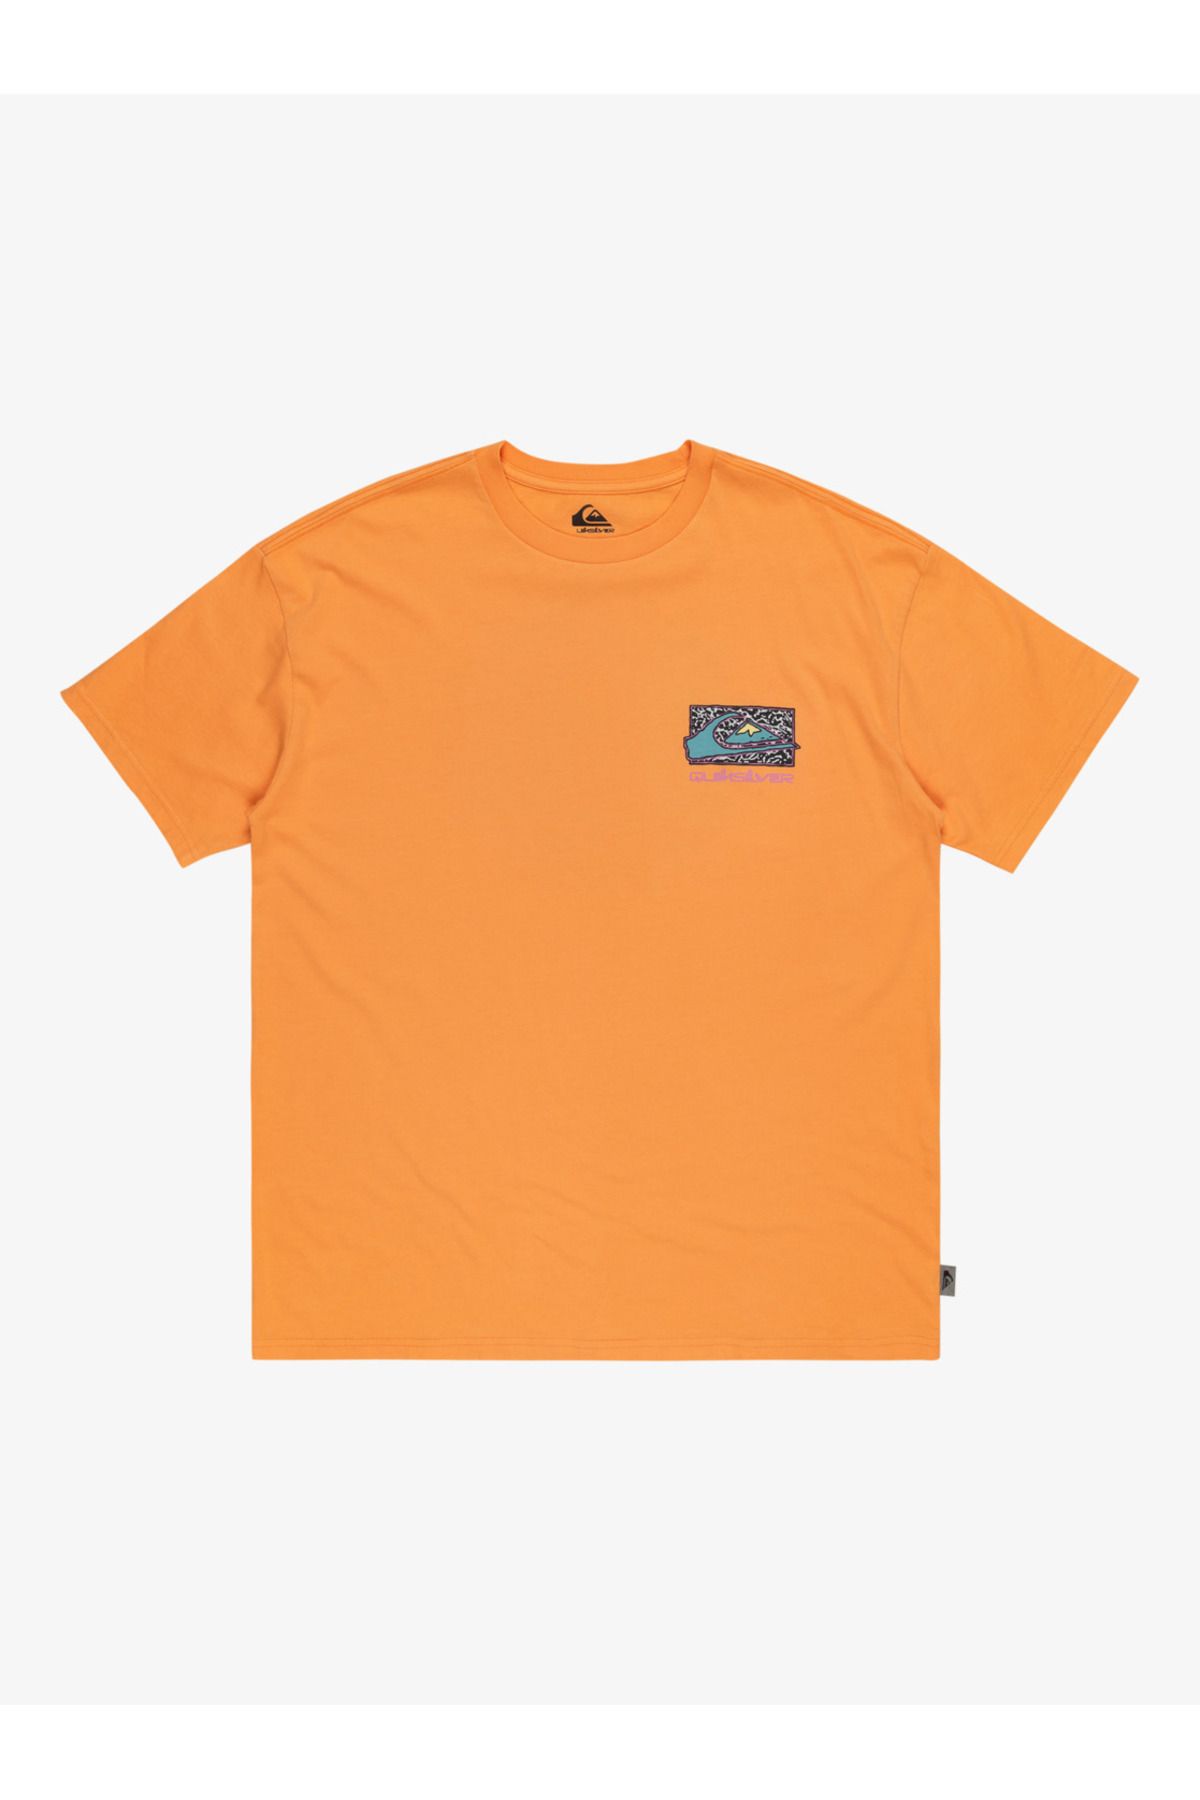 Quiksilver QUİKSİLVER SPİN CYCYLE SS T-shirt